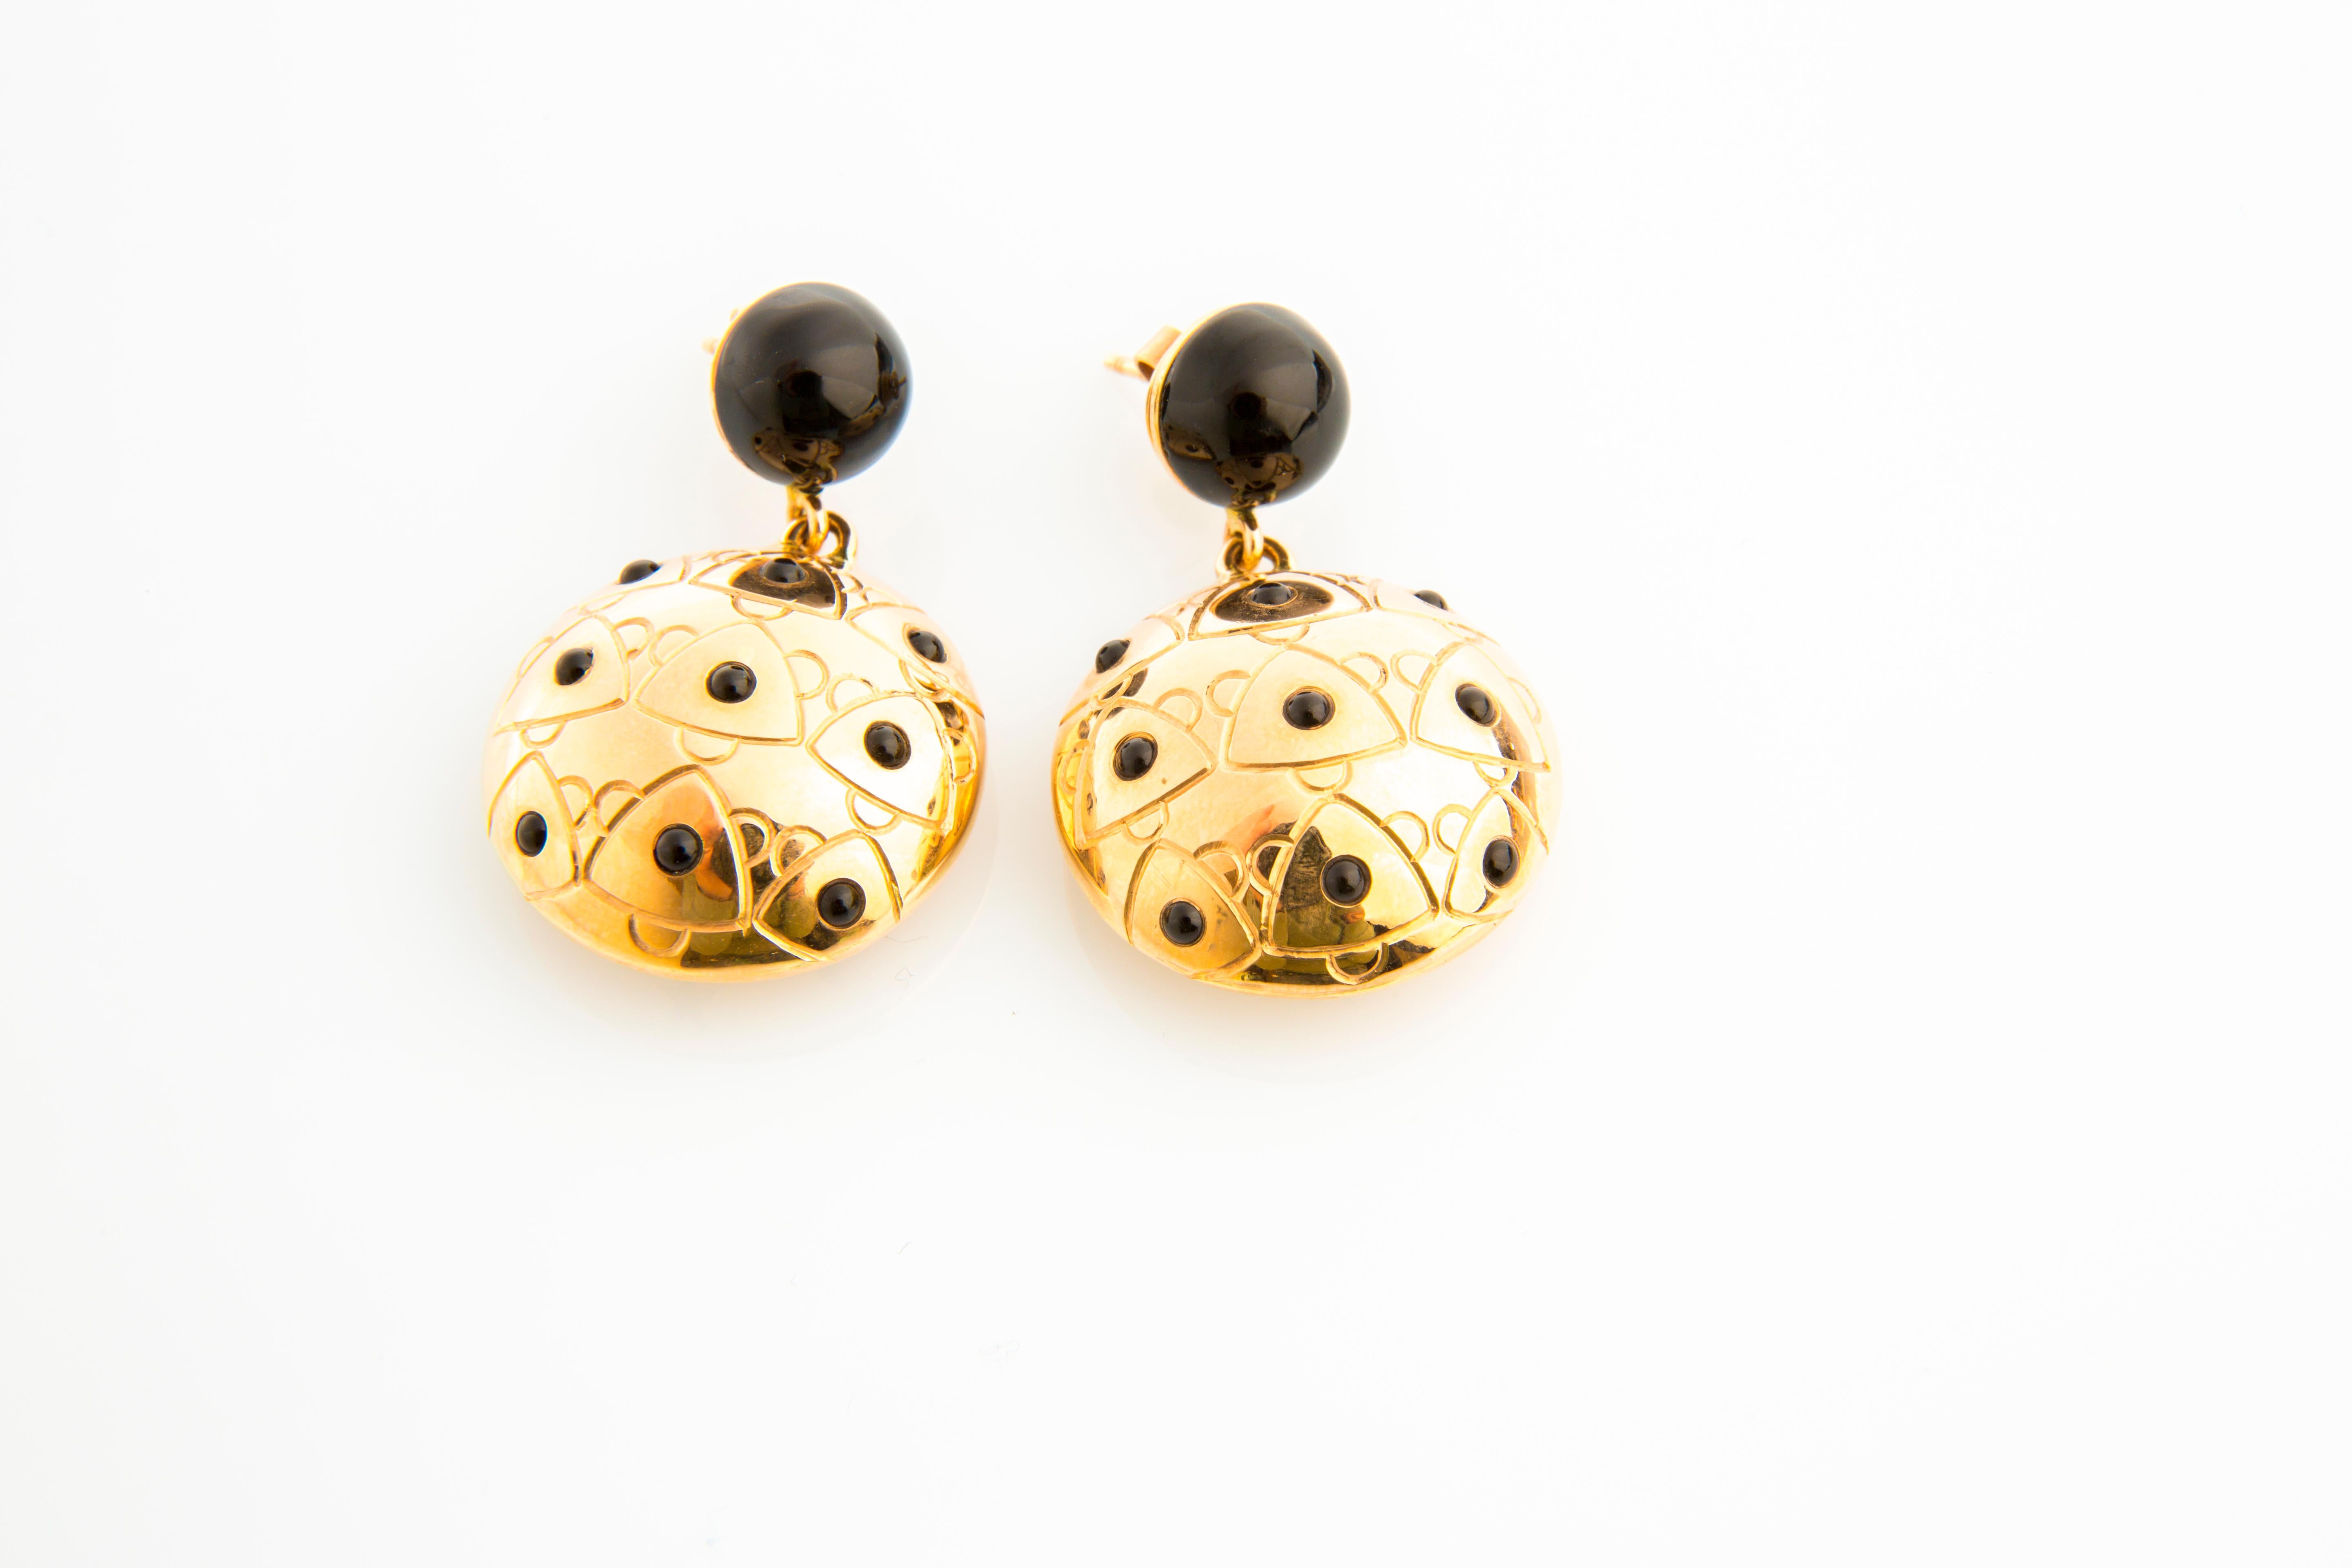 Sea Urchin Earrings with Onyx and Gold 18 Karat In New Condition For Sale In Wiesbaden, DE